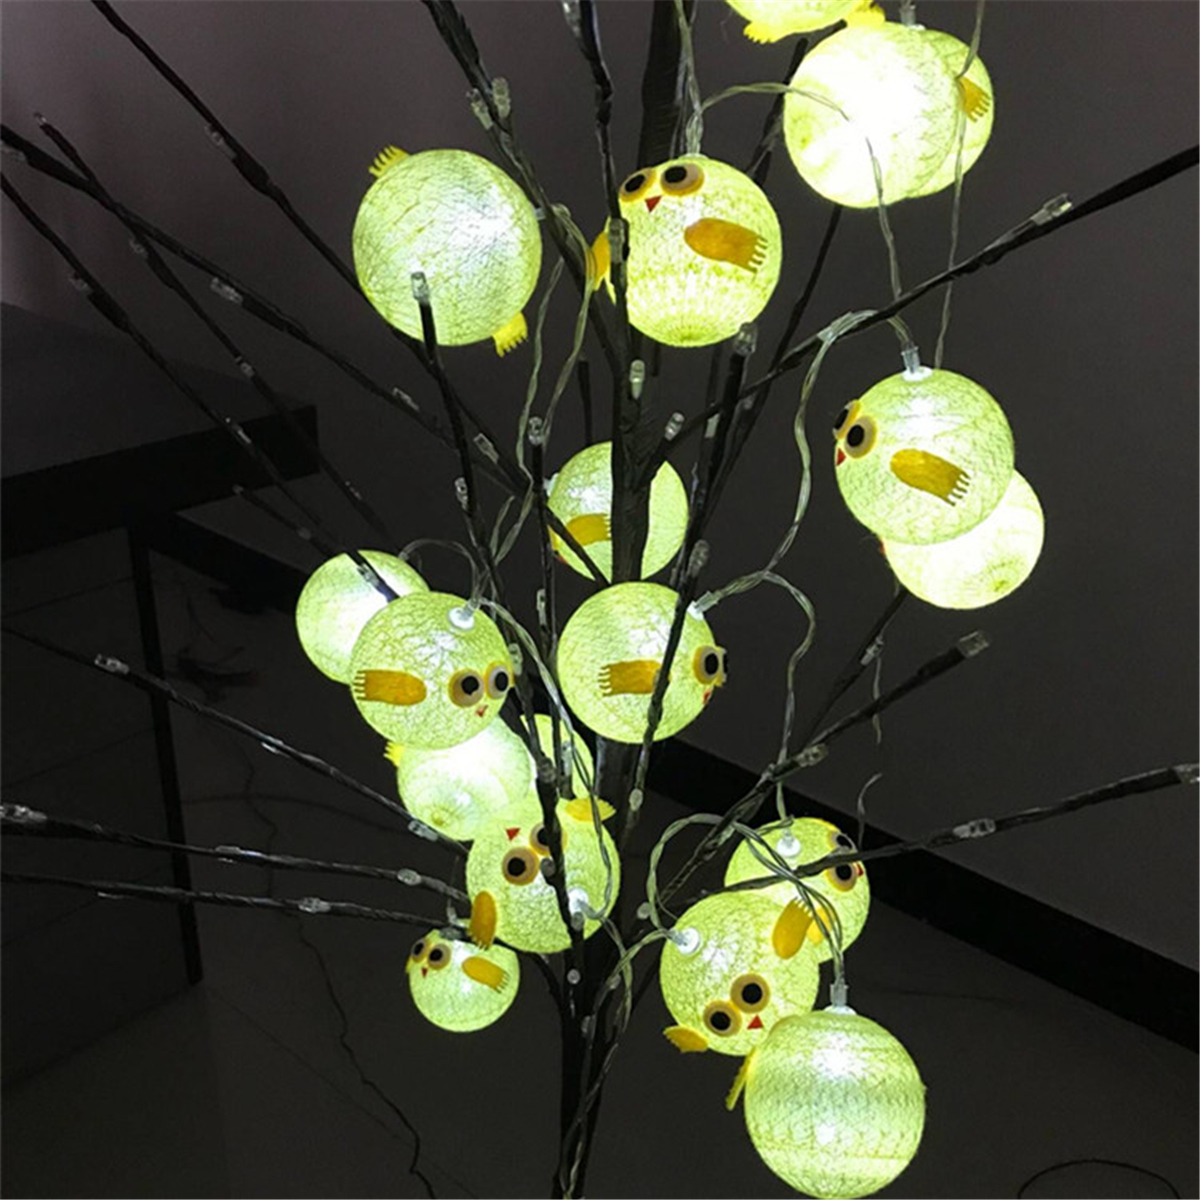 101520-Chicken-Cotton-Fairy-String-Light-Birthday-Party-Kids-Bedroom-Decorations-1640768-6